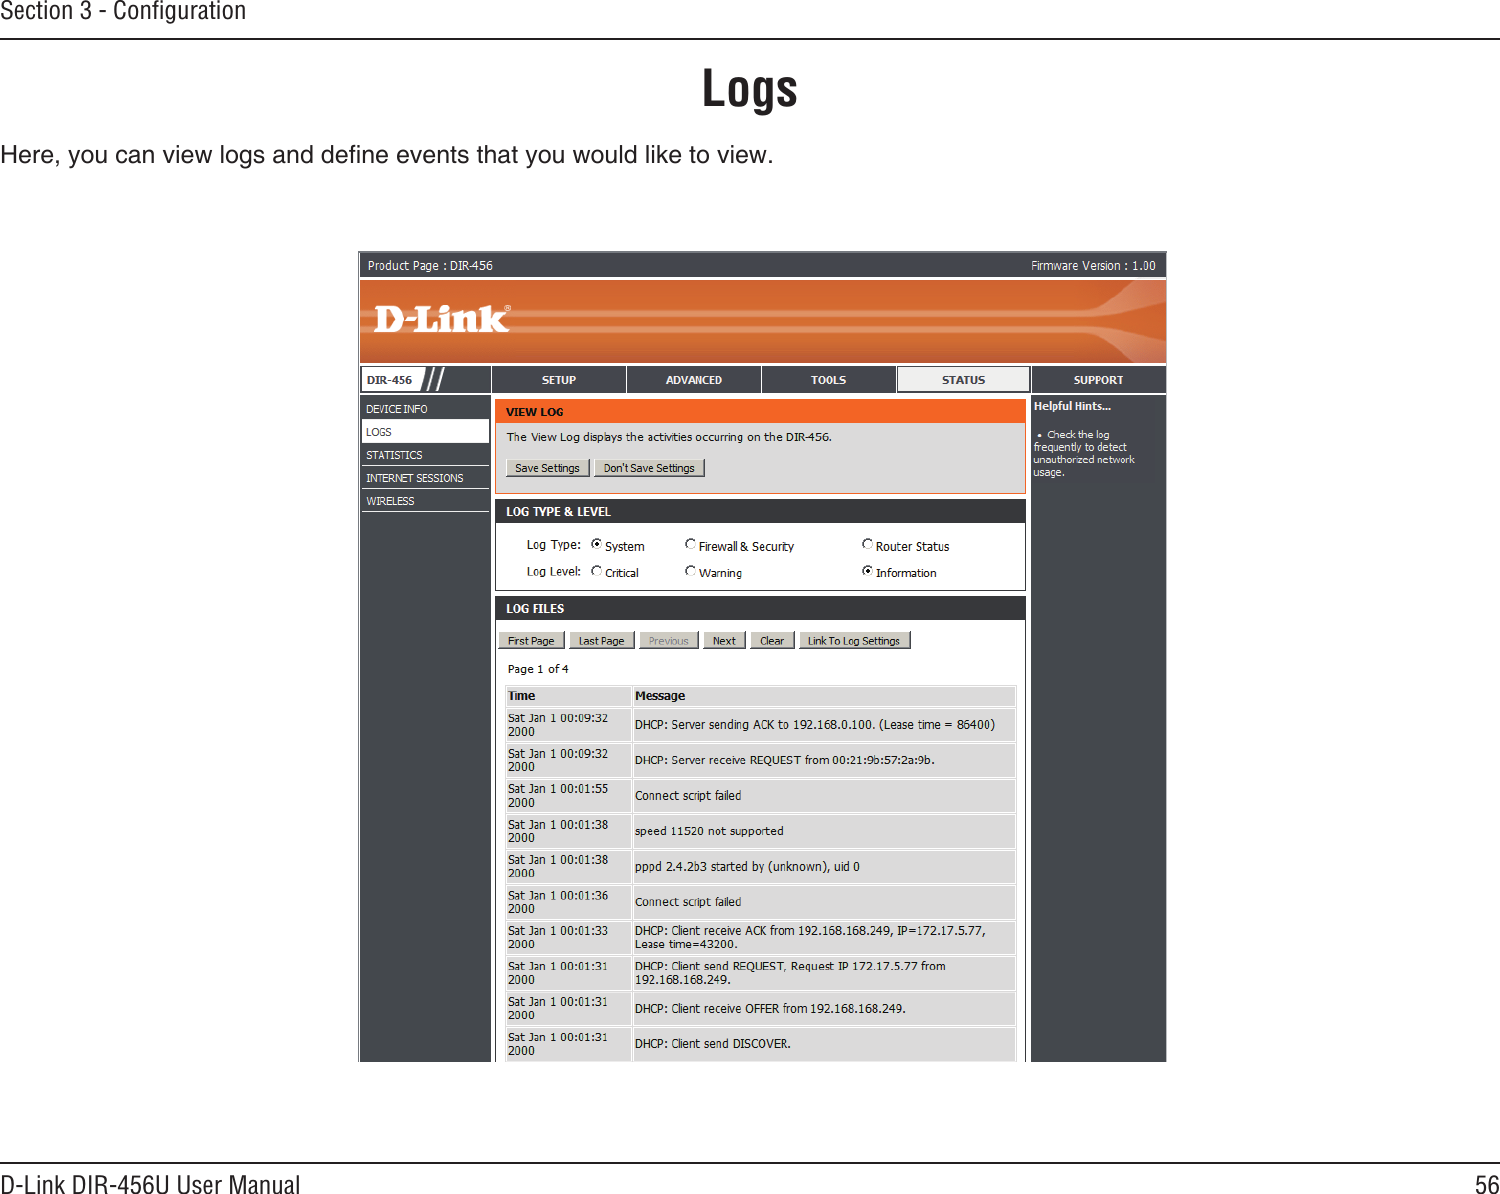 56D-Link DIR-456U User ManualSection 3 - ConﬁgurationLogsHere, you can view logs and dene events that you would like to view. 